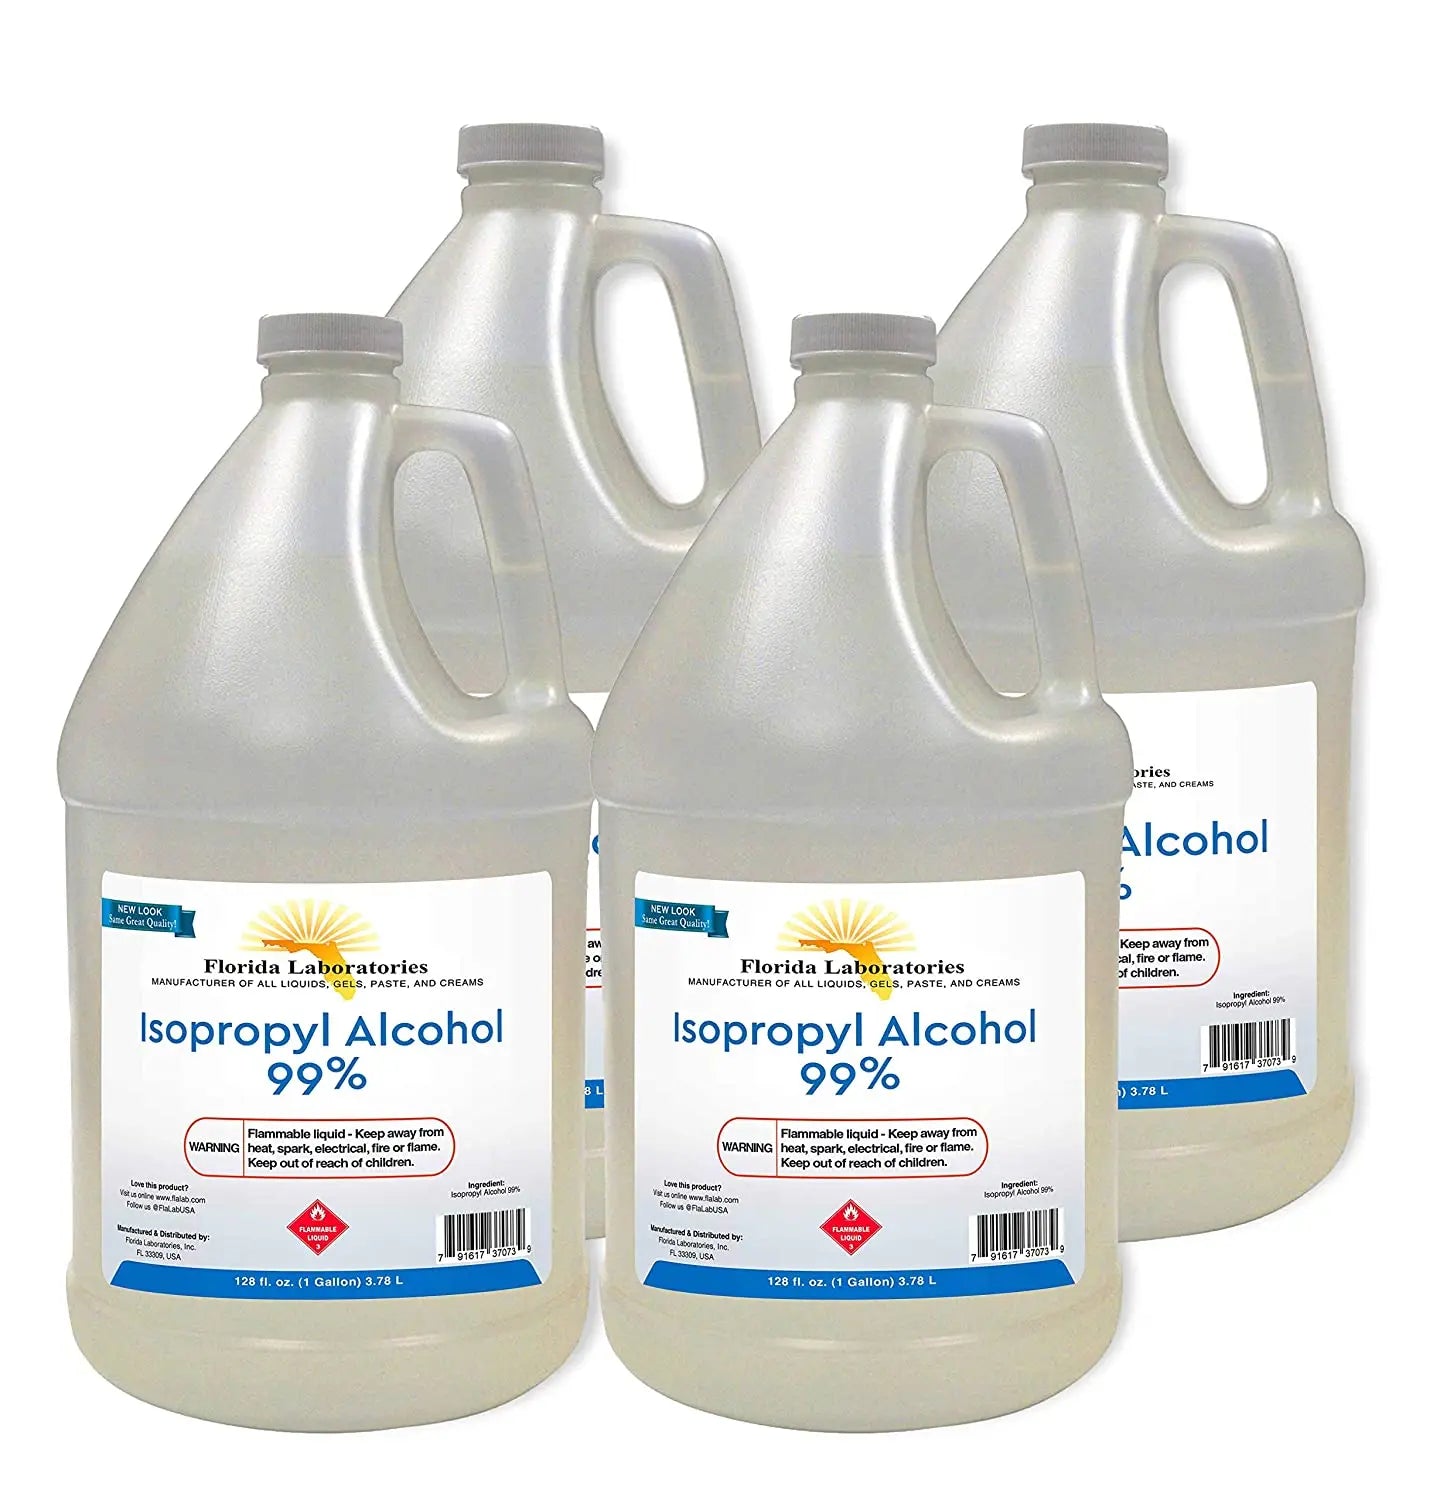 Isopropyl Alcohol Grade 99% Anhydrous 1 Gal - Viking Lab Supply